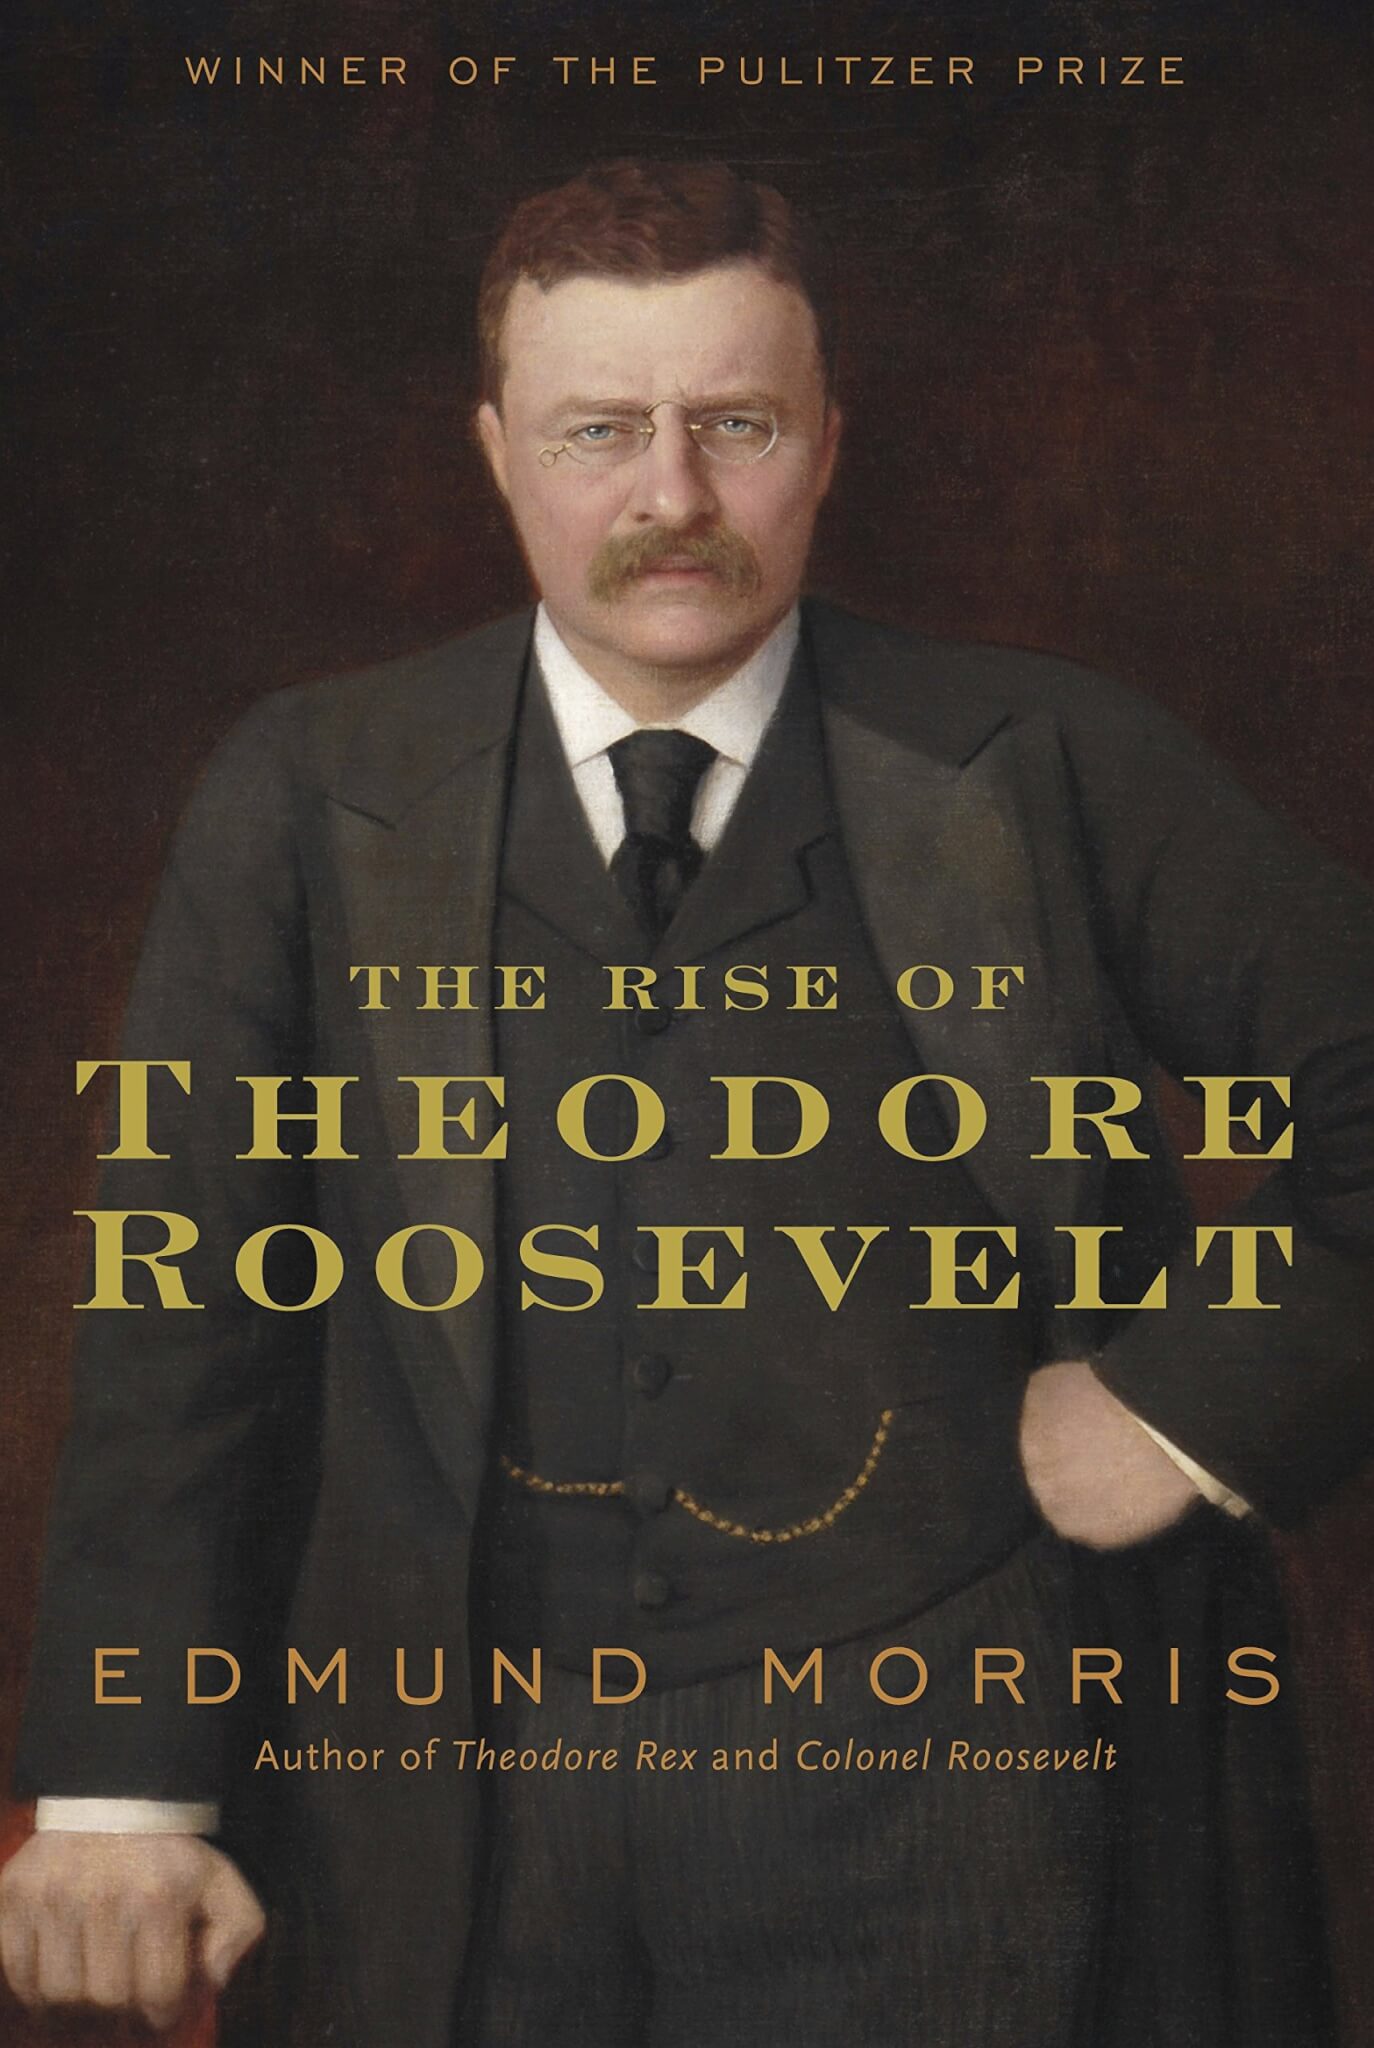 "The Rise of Theodore Roosevelt" by Edmund Morris